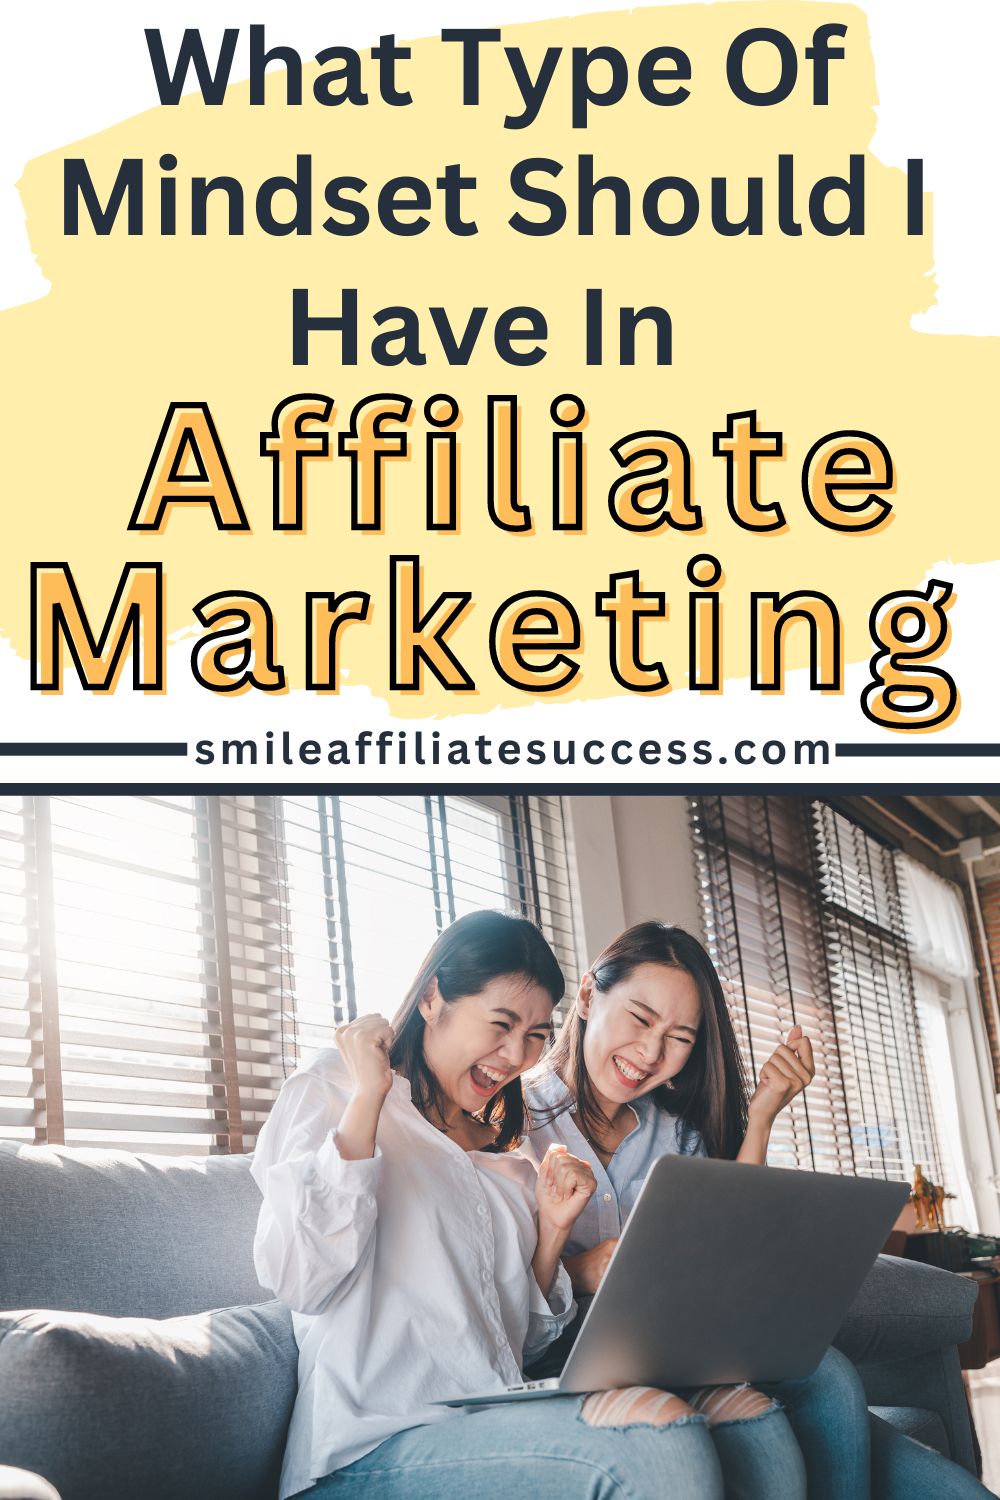 What Type Of Mindset Should I Have In Affiliate Marketing?